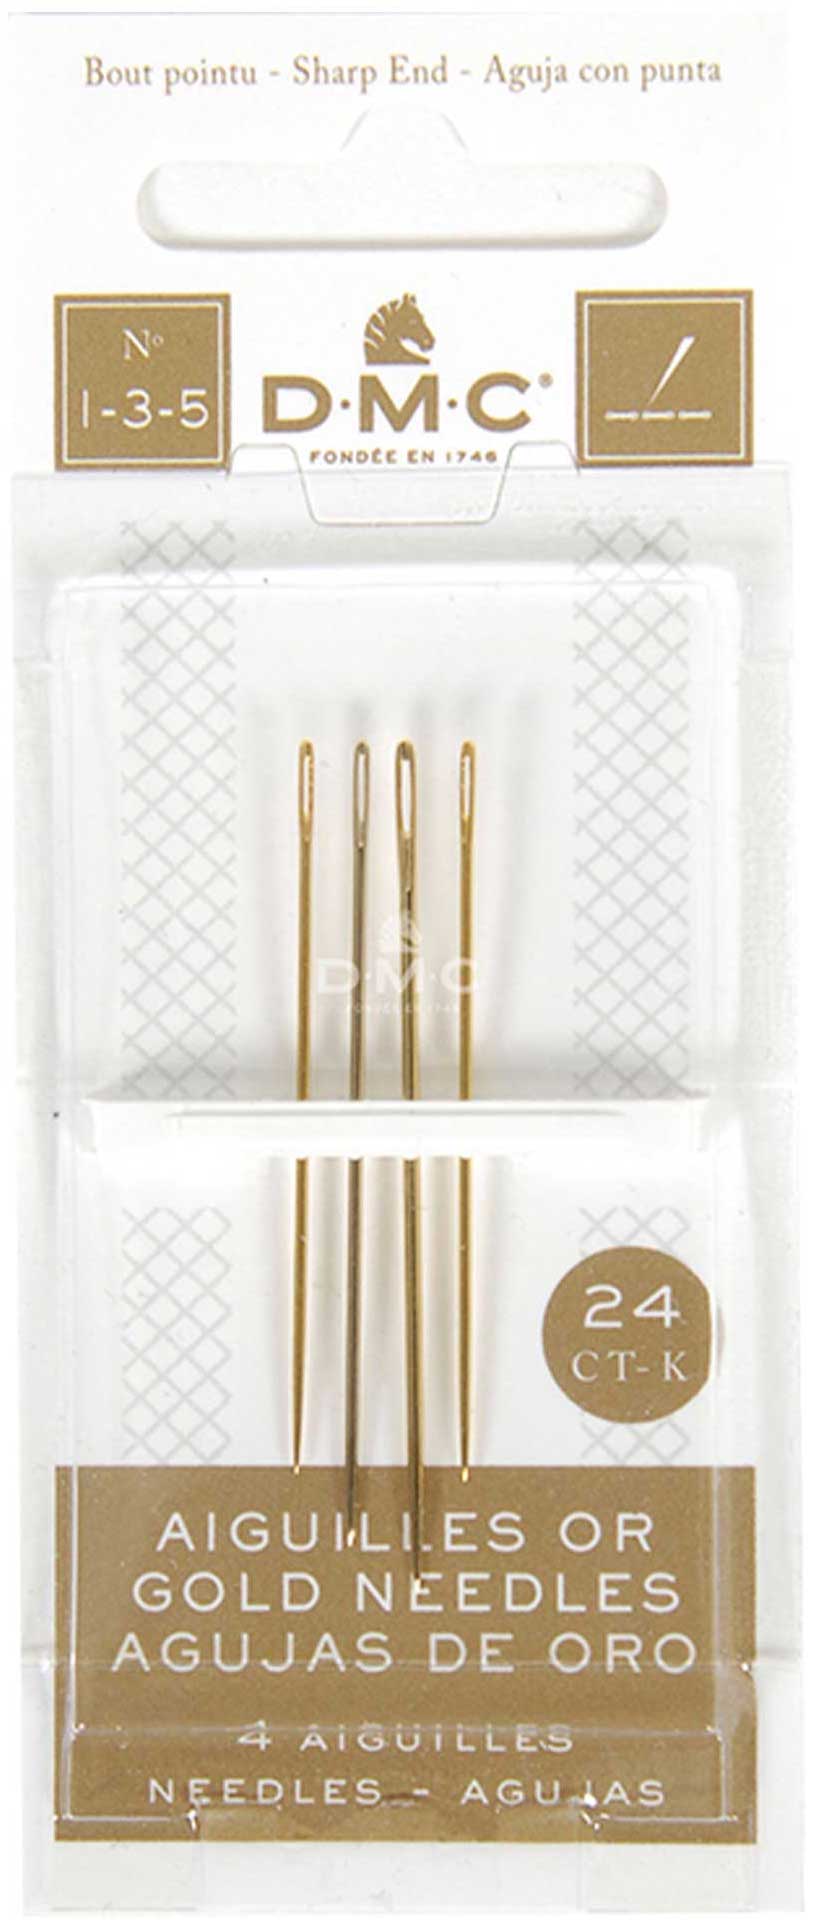 Gold Plated Embroidery Needles - Sizes 1/3/5 x 4